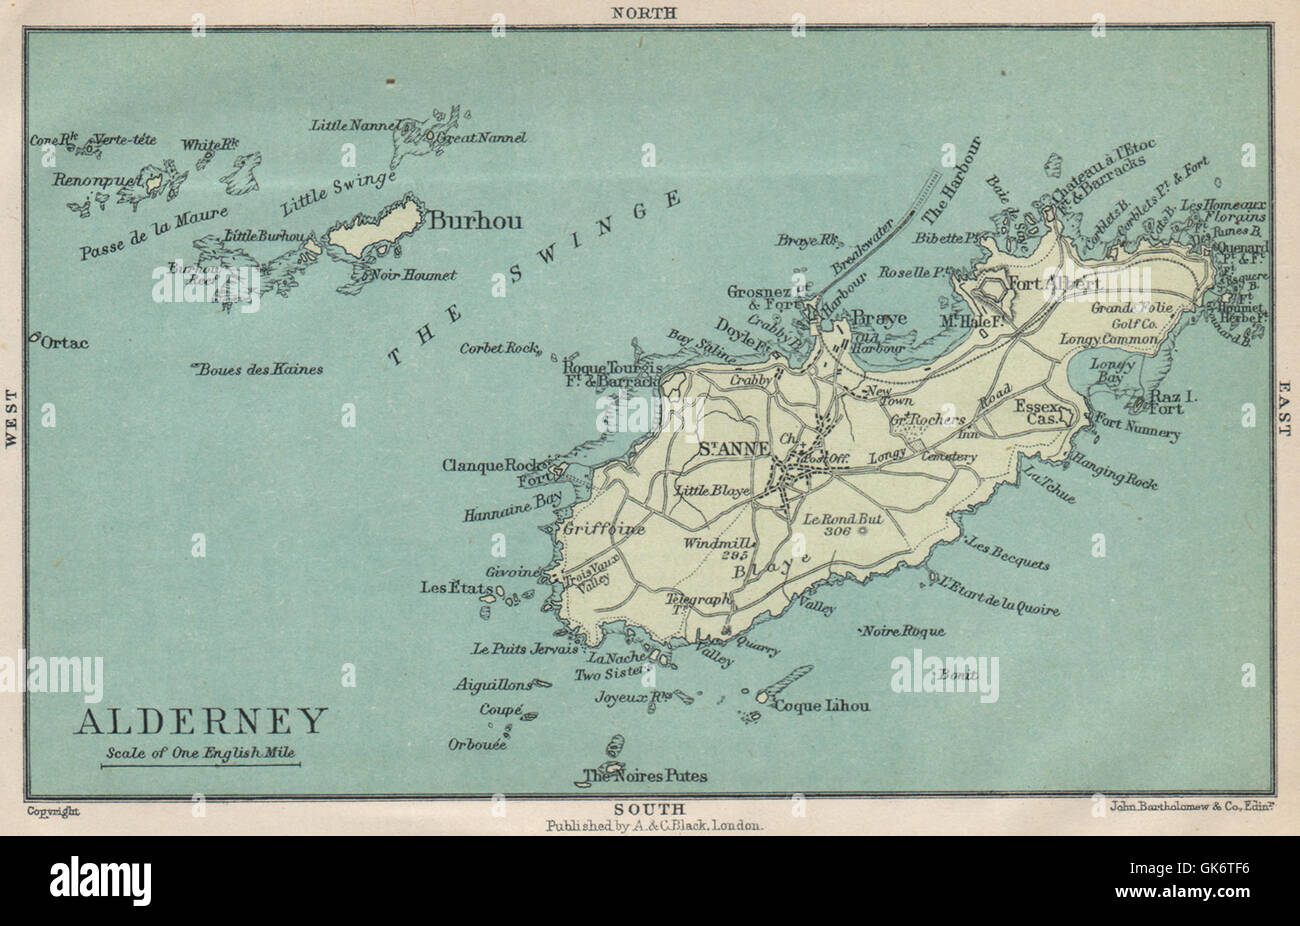 The island of ALDERNEY. St Anne. Channel Islands, 1913 antique map Stock Photo